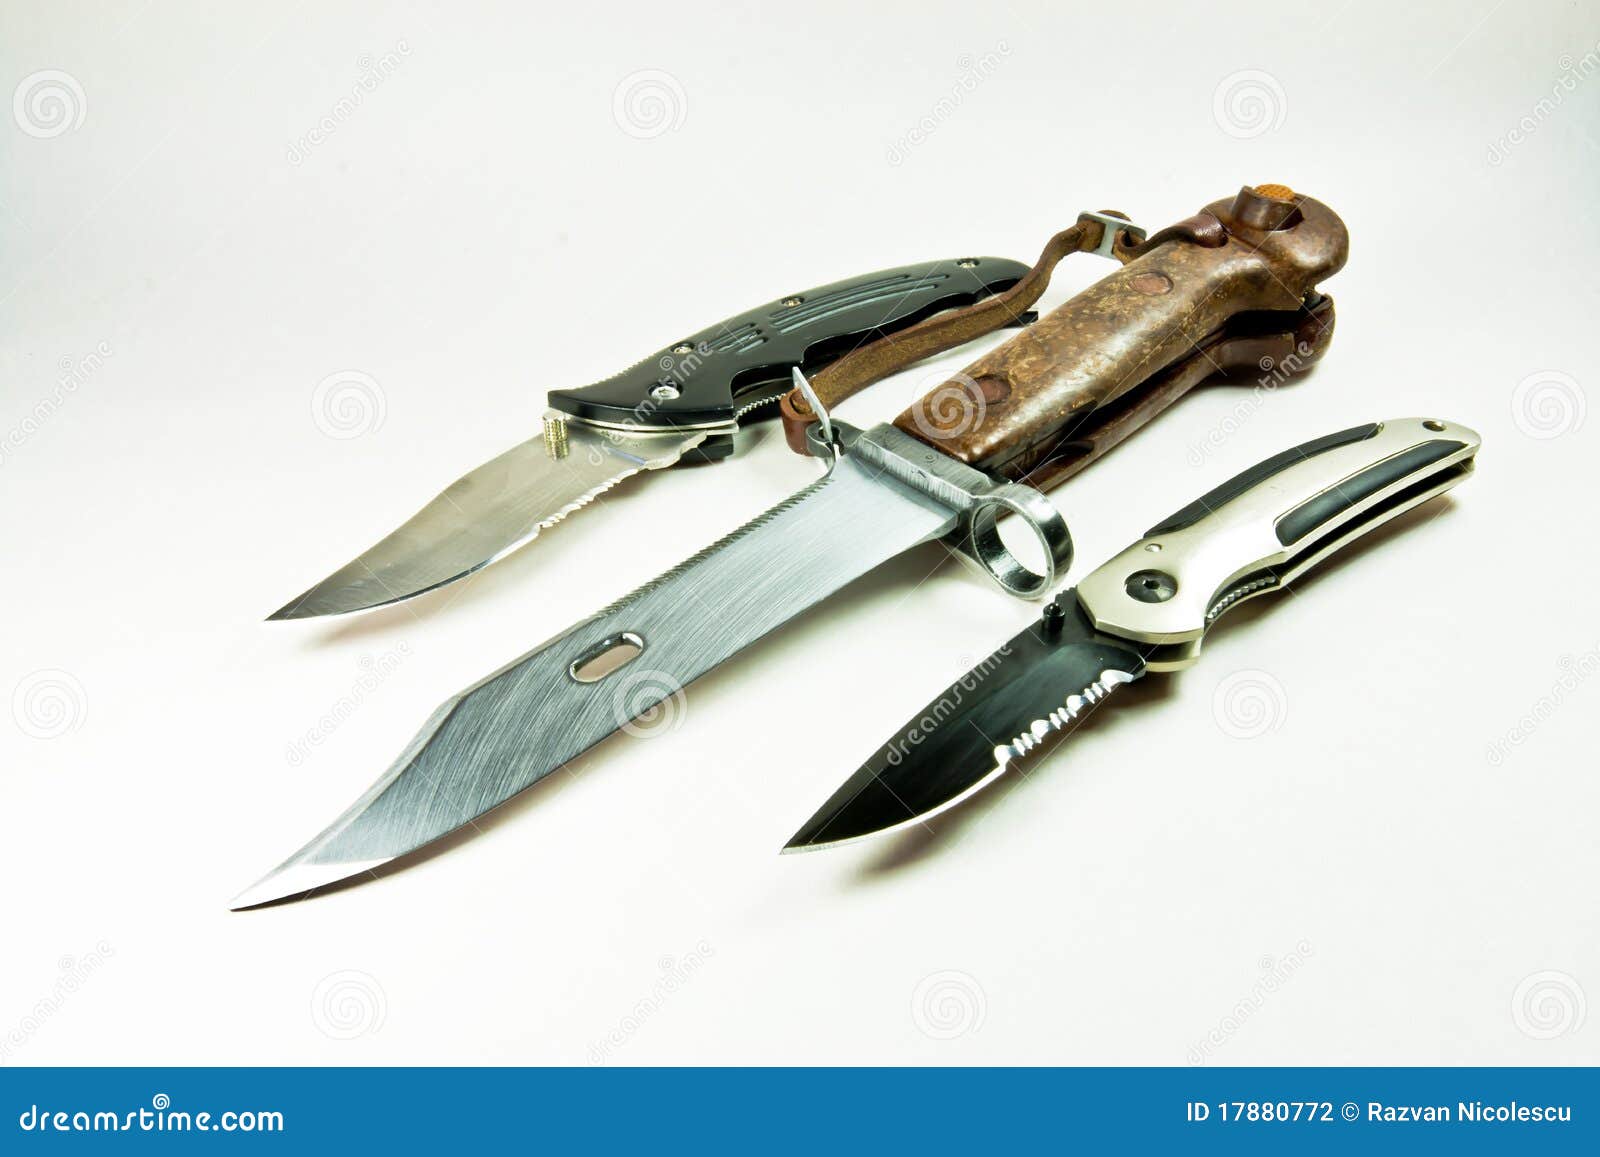 knifes and old army bayonet